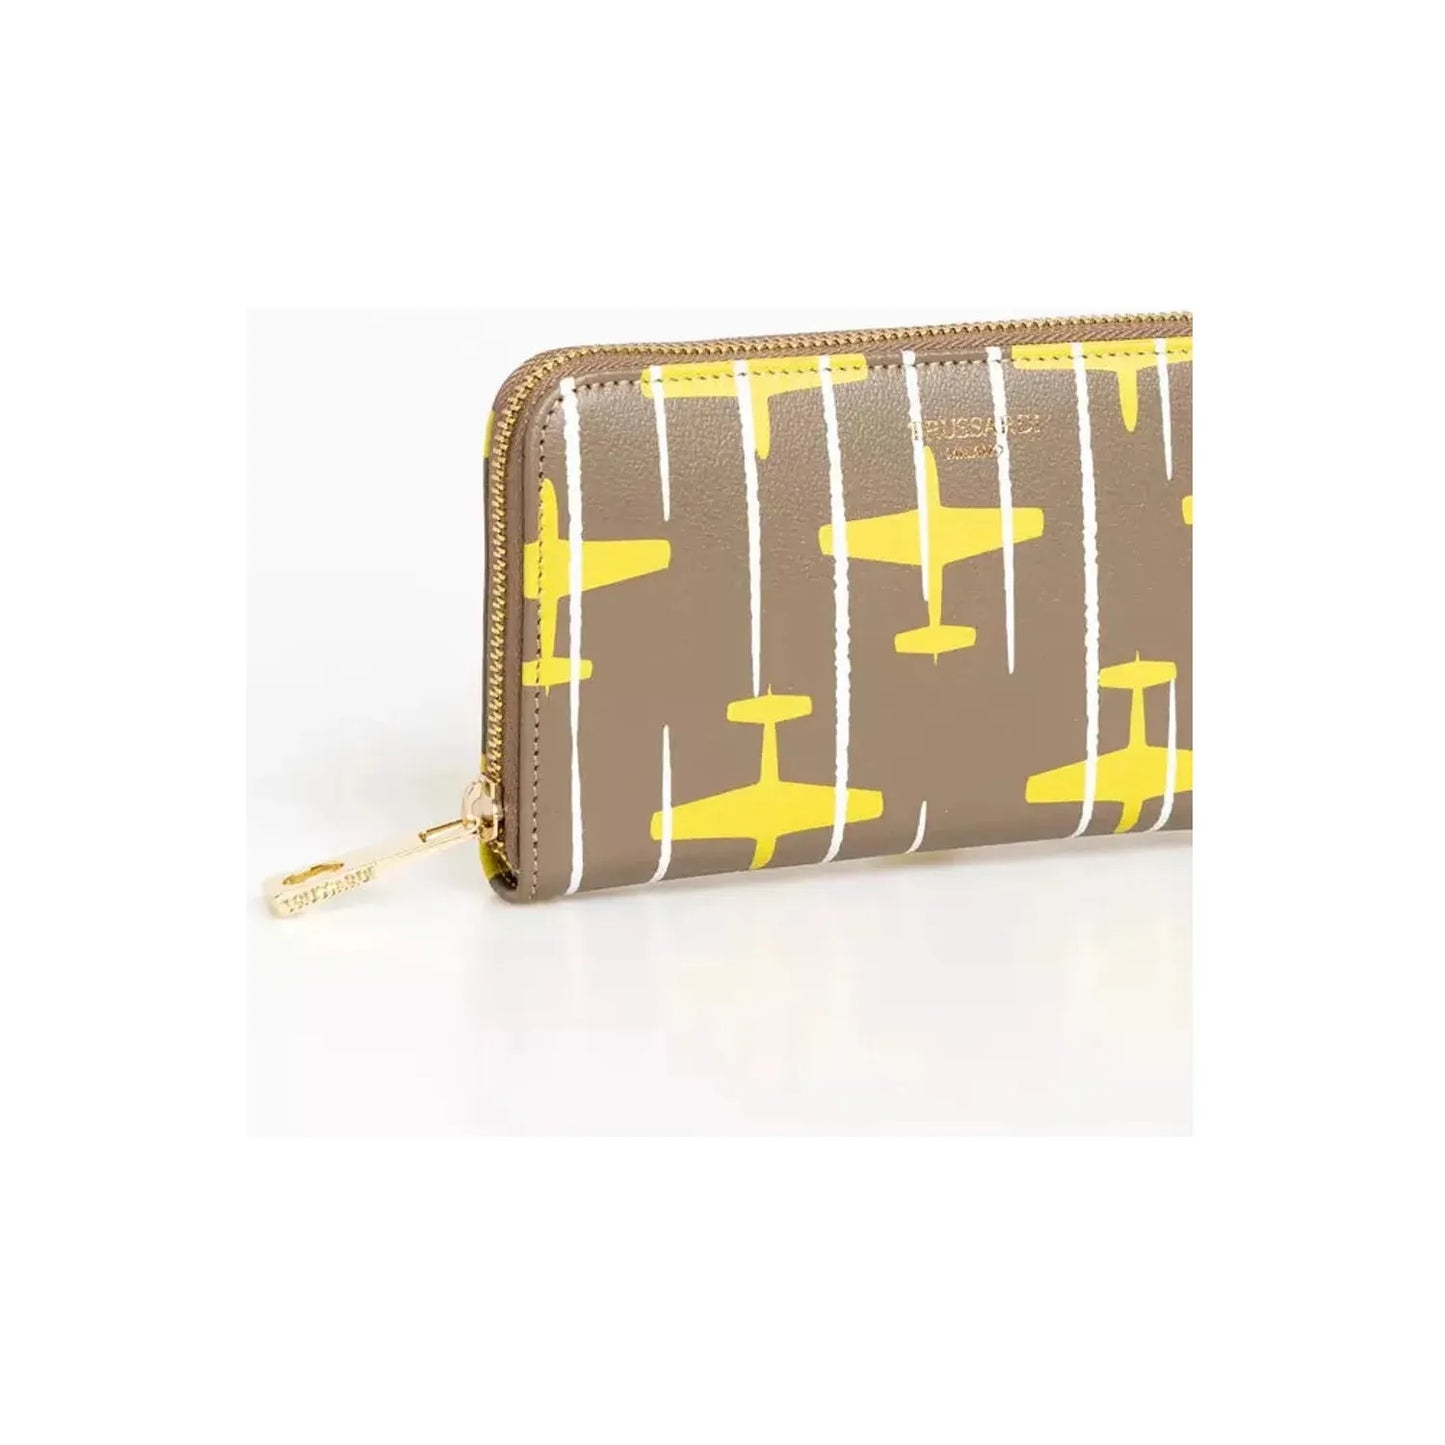 Trussardi Elegant Striped Leather Zip Wallet y-yellow-leather-wallet Wallet stock_product_image_21531_1973439594-22-60fbe176-7fd.webp